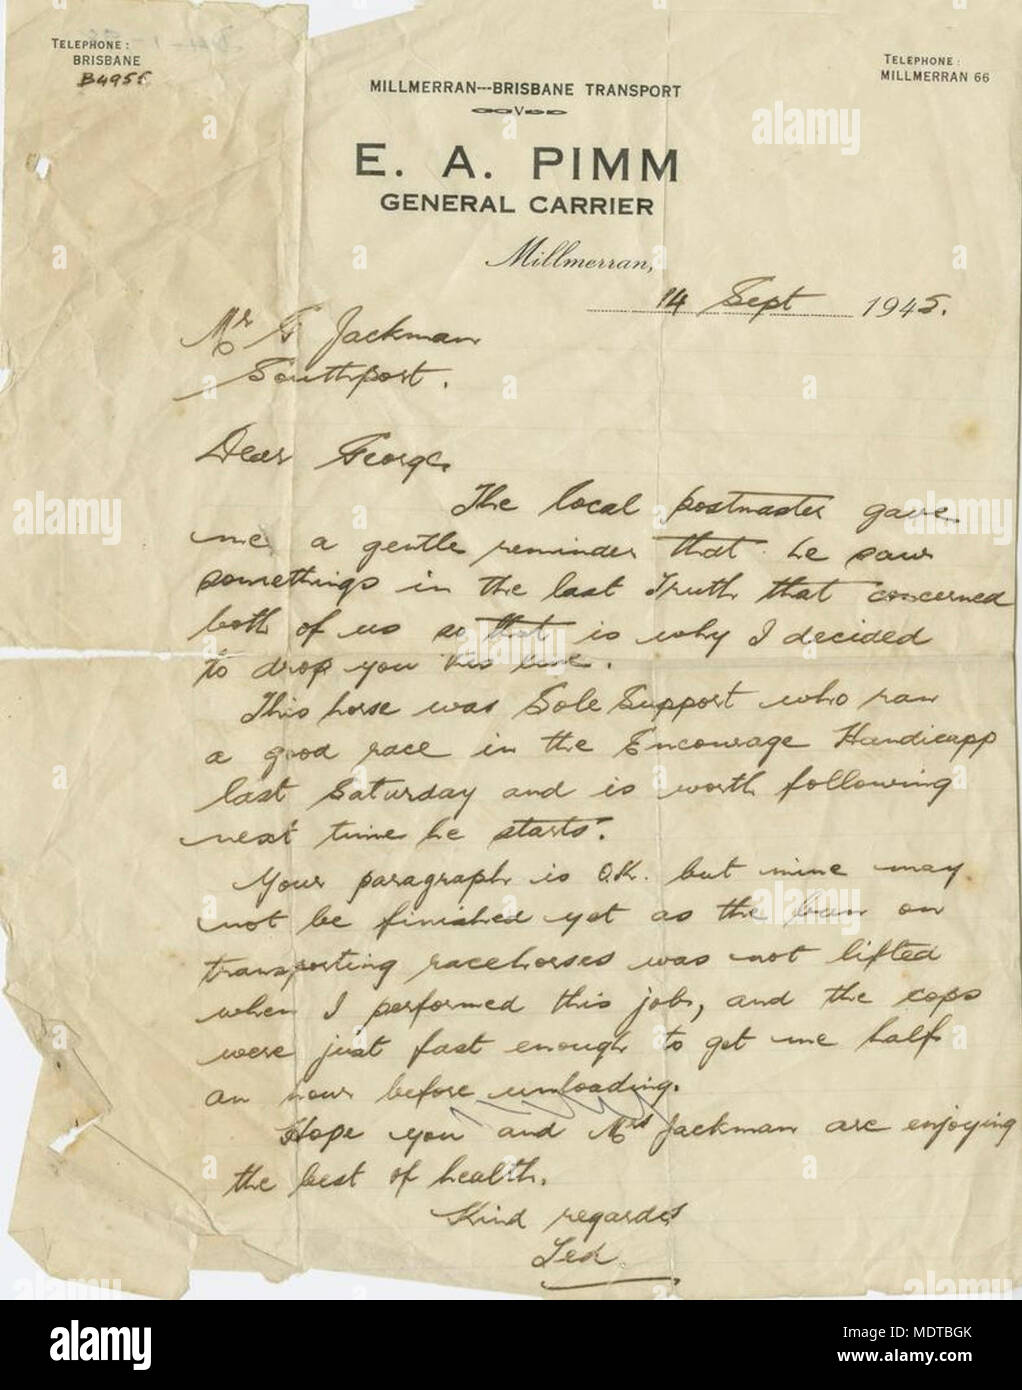 Letter written to George Jackman from E A Pimm, Millmerran. Location: Queensland, Australia  Date: 13th September 1945  Description: Letter refers to a racehorse called Sole Support and the banning of horse transport at the time. Stock Photo